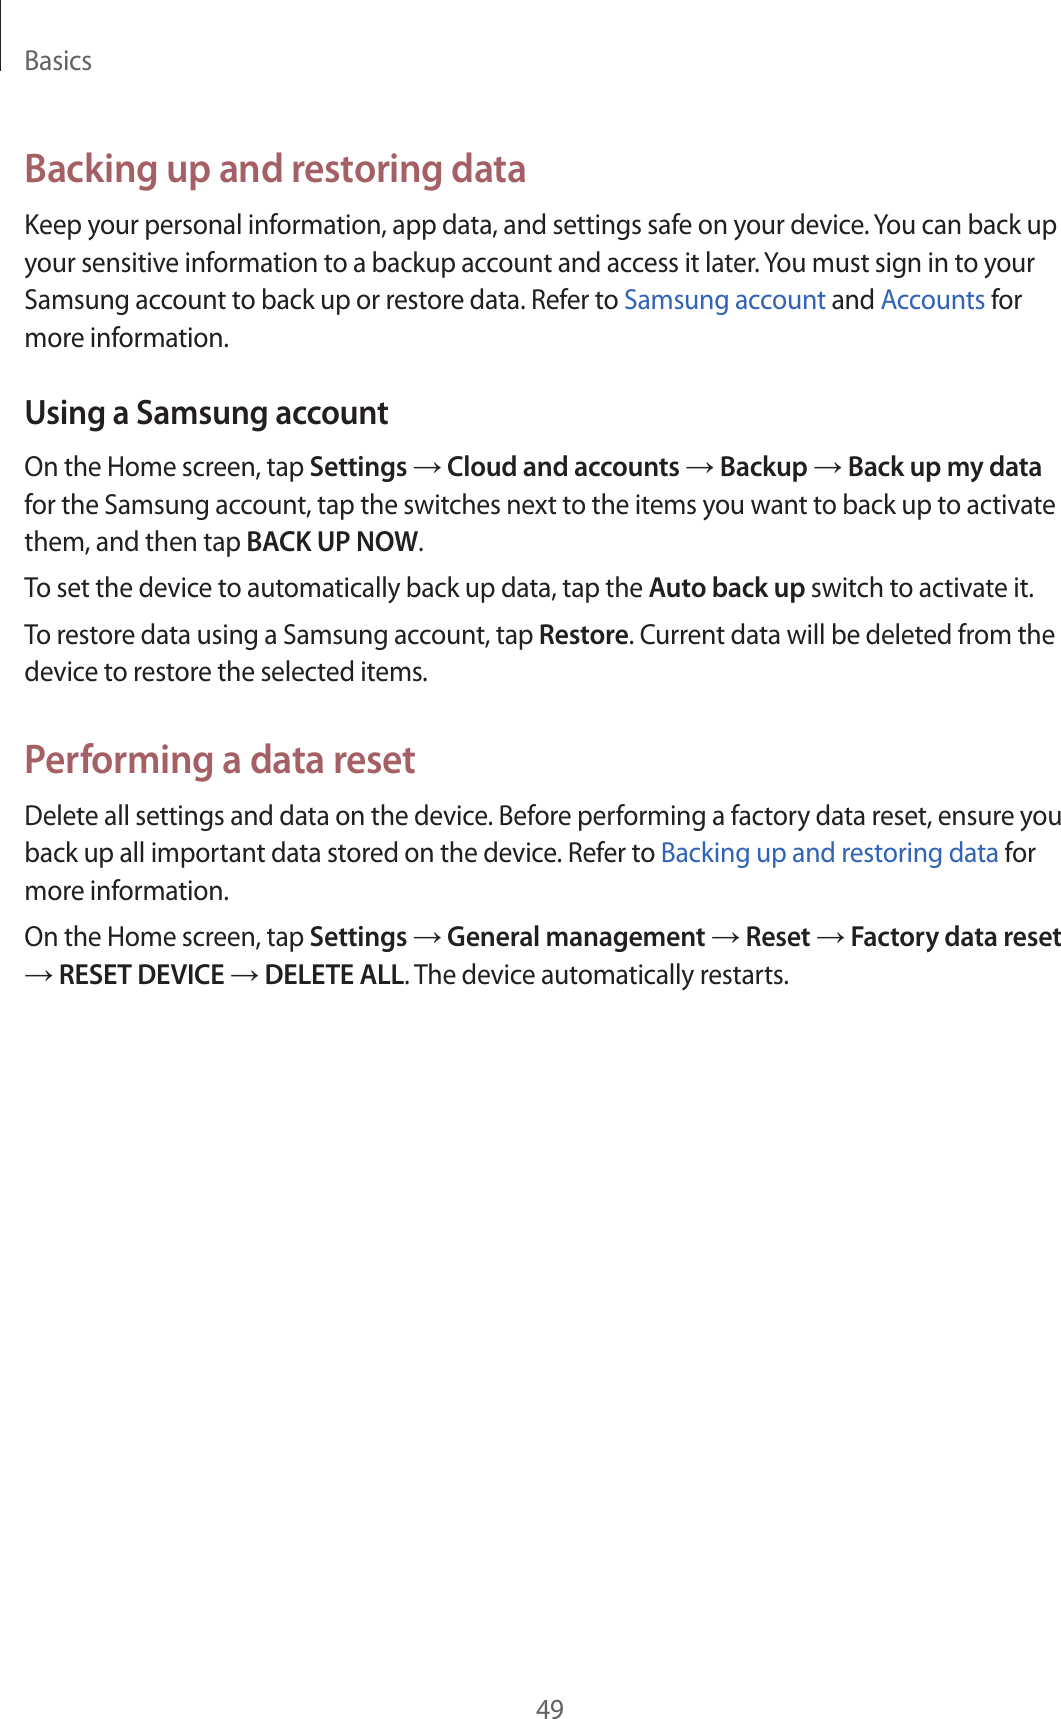 Basics49Backing up and restoring dataKeep your personal information, app data, and settings safe on your device. You can back up your sensitive information to a backup account and access it later. You must sign in to your Samsung account to back up or restore data. Refer to Samsung account and Accounts for more information.Using a Samsung accountOn the Home screen, tap Settings → Cloud and accounts → Backup → Back up my data for the Samsung account, tap the switches next to the items you want to back up to activate them, and then tap BACK UP NOW.To set the device to automatically back up data, tap the Auto back up switch to activate it.To restore data using a Samsung account, tap Restore. Current data will be deleted from the device to restore the selected items.Performing a data resetDelete all settings and data on the device. Before performing a factory data reset, ensure you back up all important data stored on the device. Refer to Backing up and restoring data for more information.On the Home screen, tap Settings → General management → Reset → Factory data reset → RESET DEVICE → DELETE ALL. The device automatically restarts.